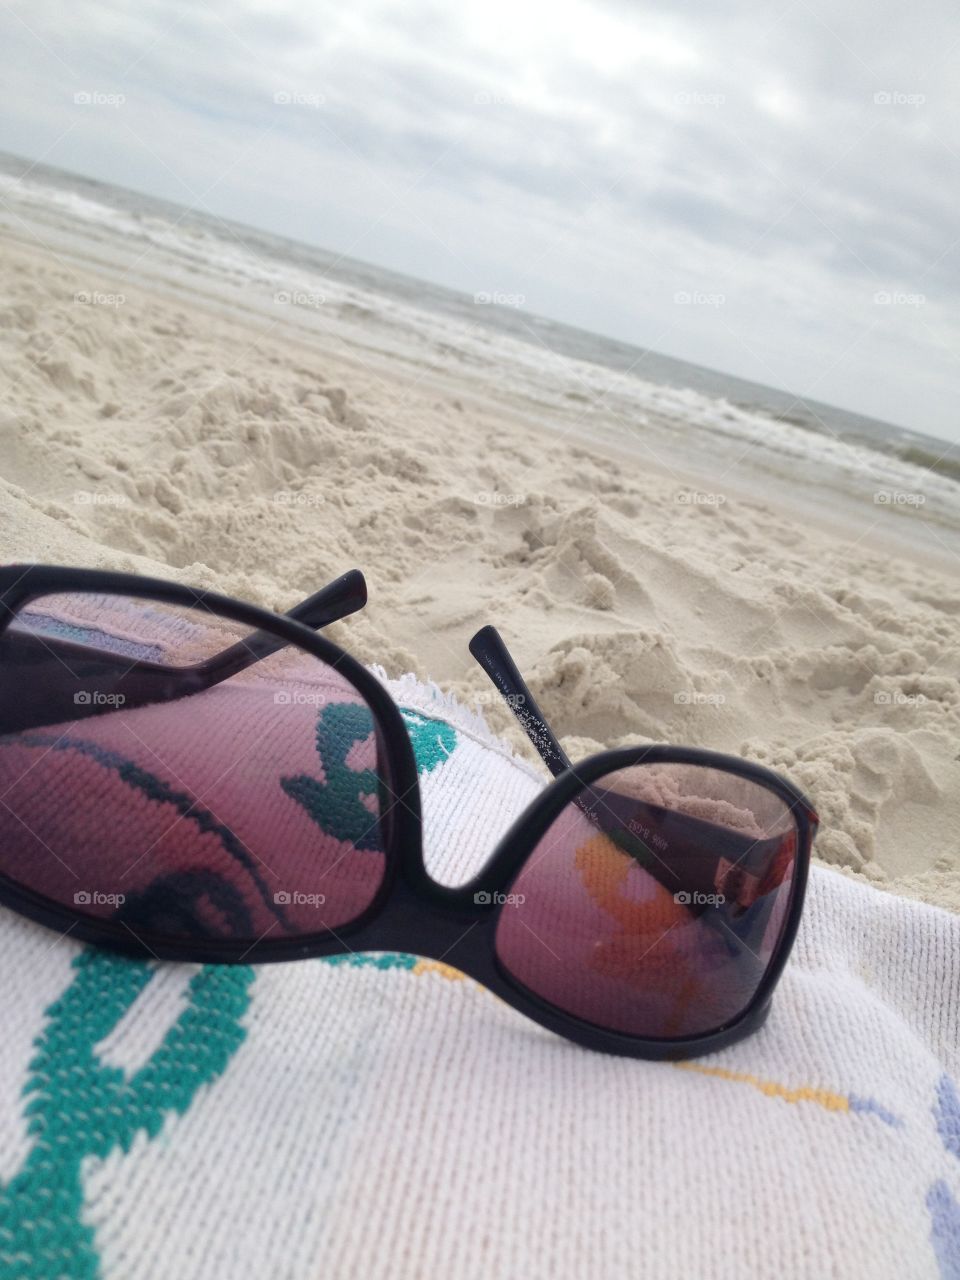 Shades in the sand